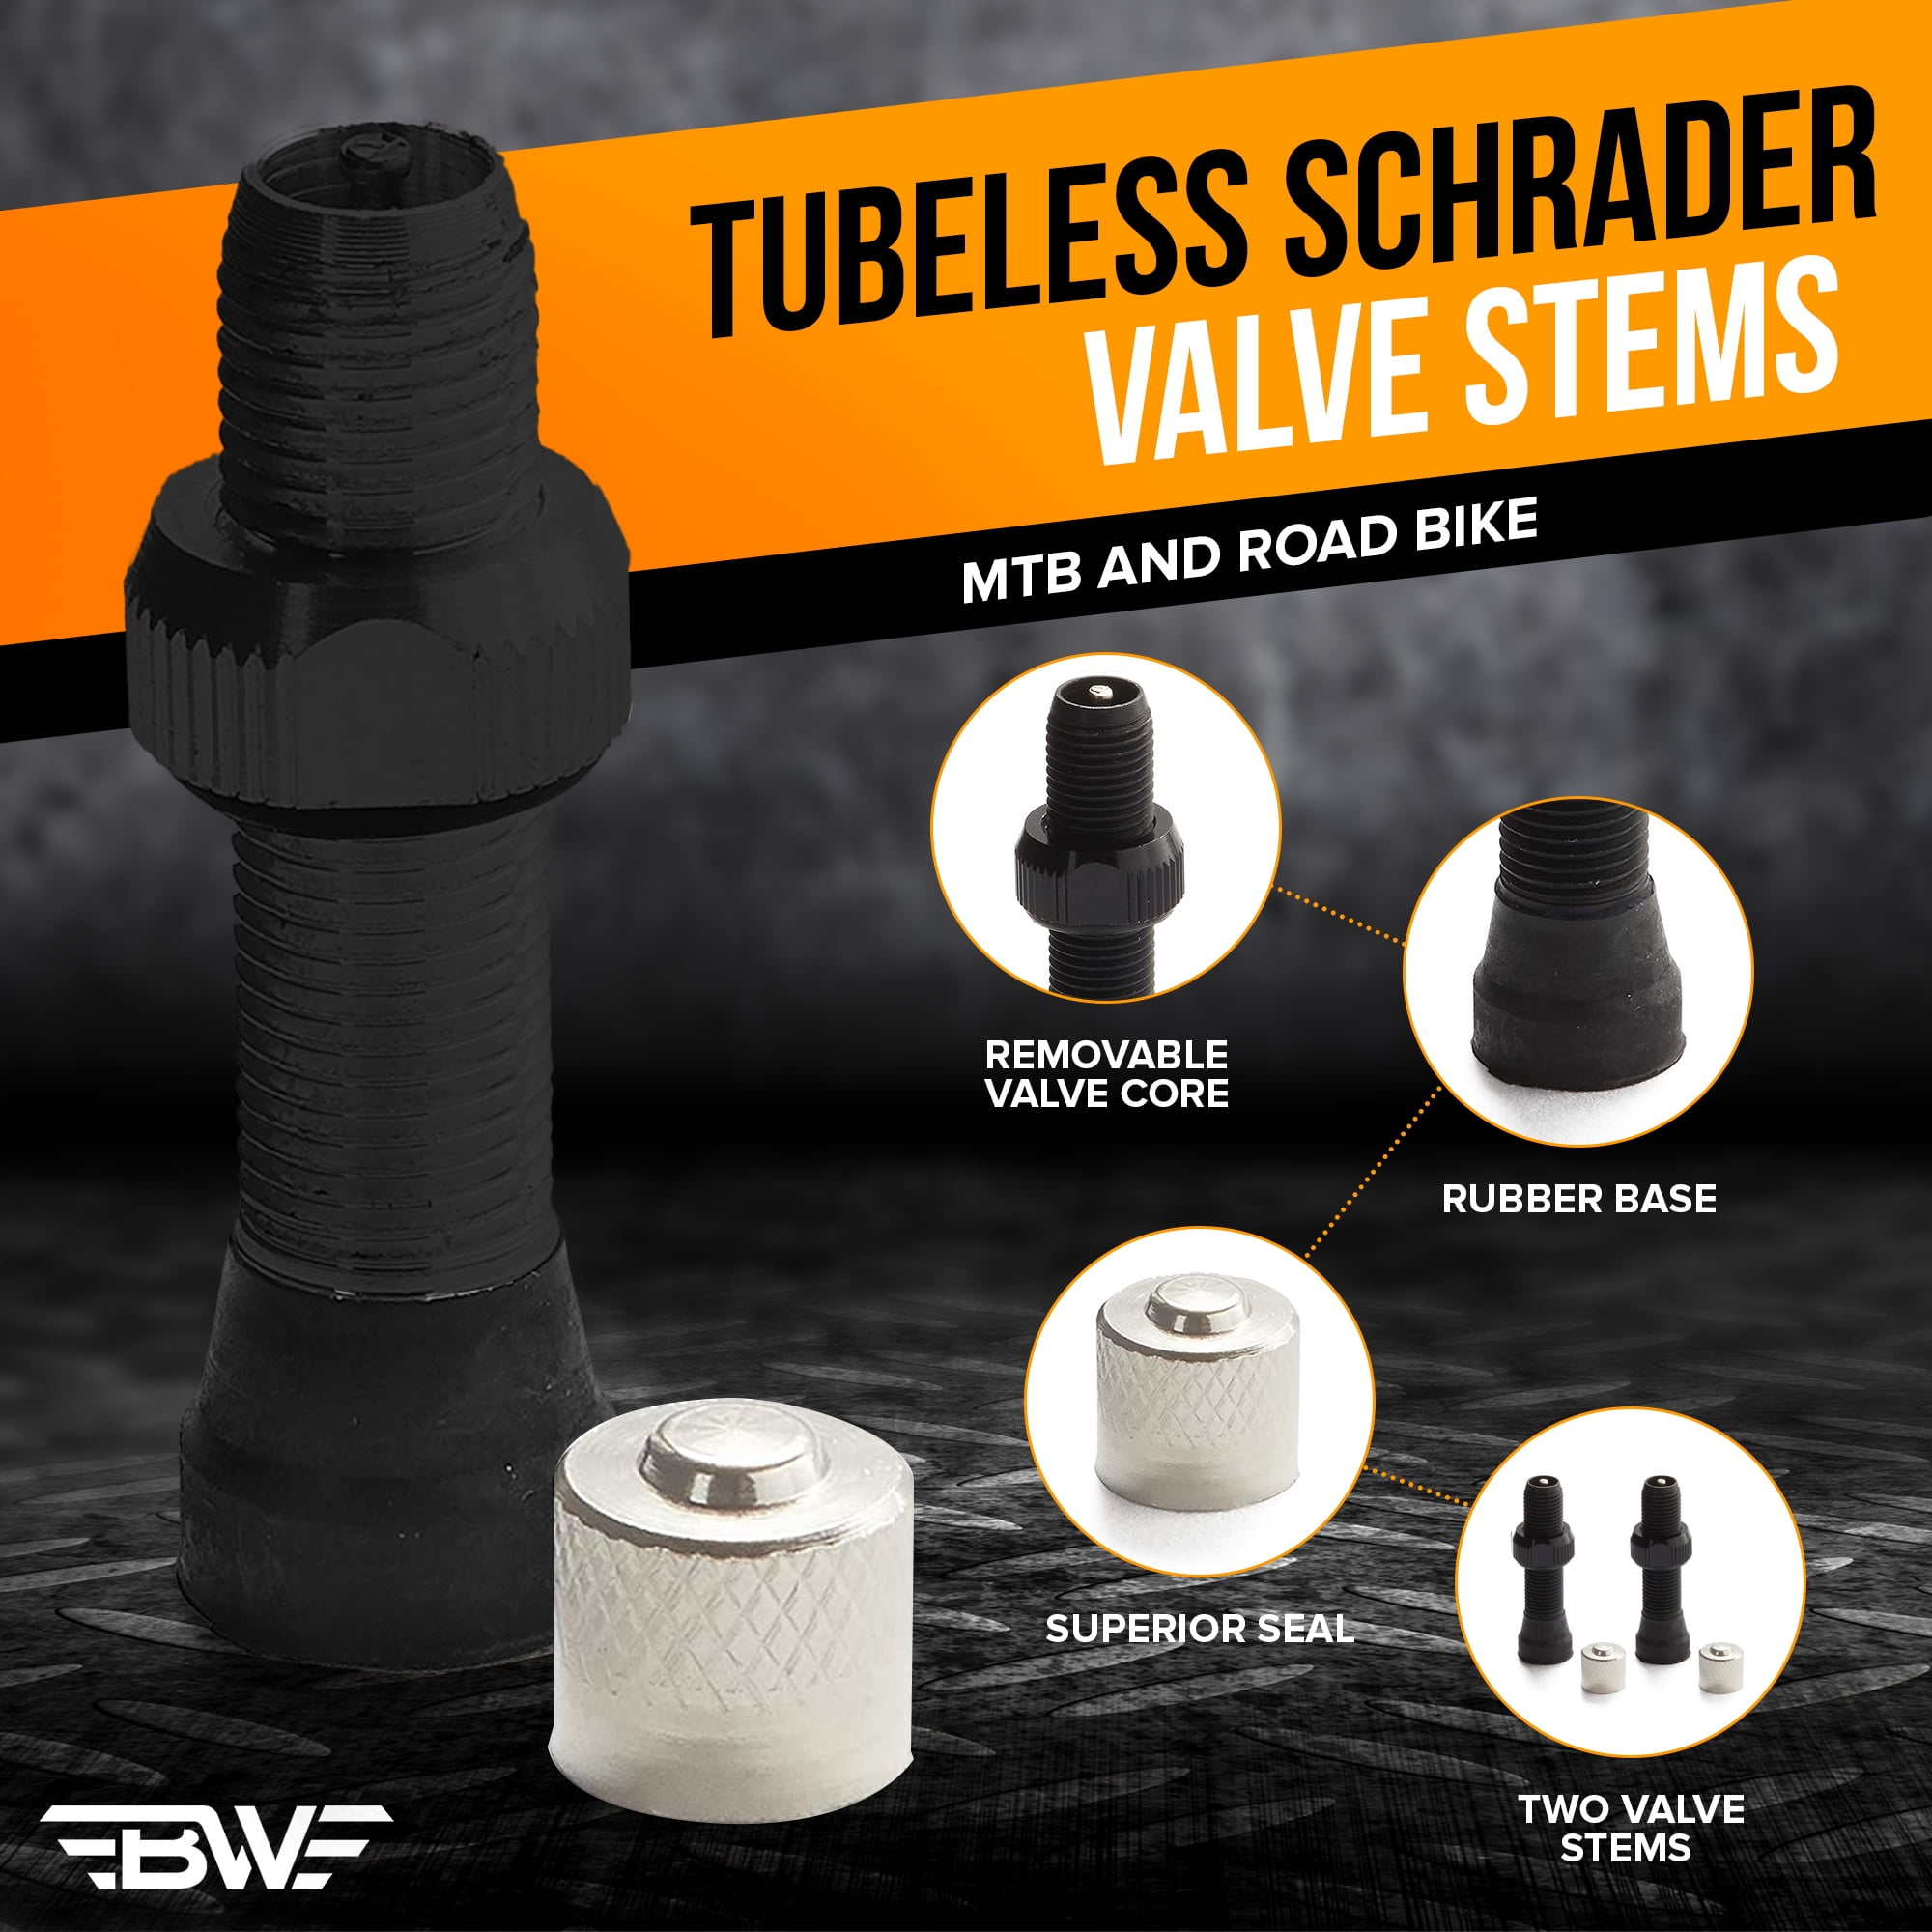 BW Tubeless Schrader Valve Stems 36 and 44mm Options for MTB and Road Bike Available in Black and Silver 